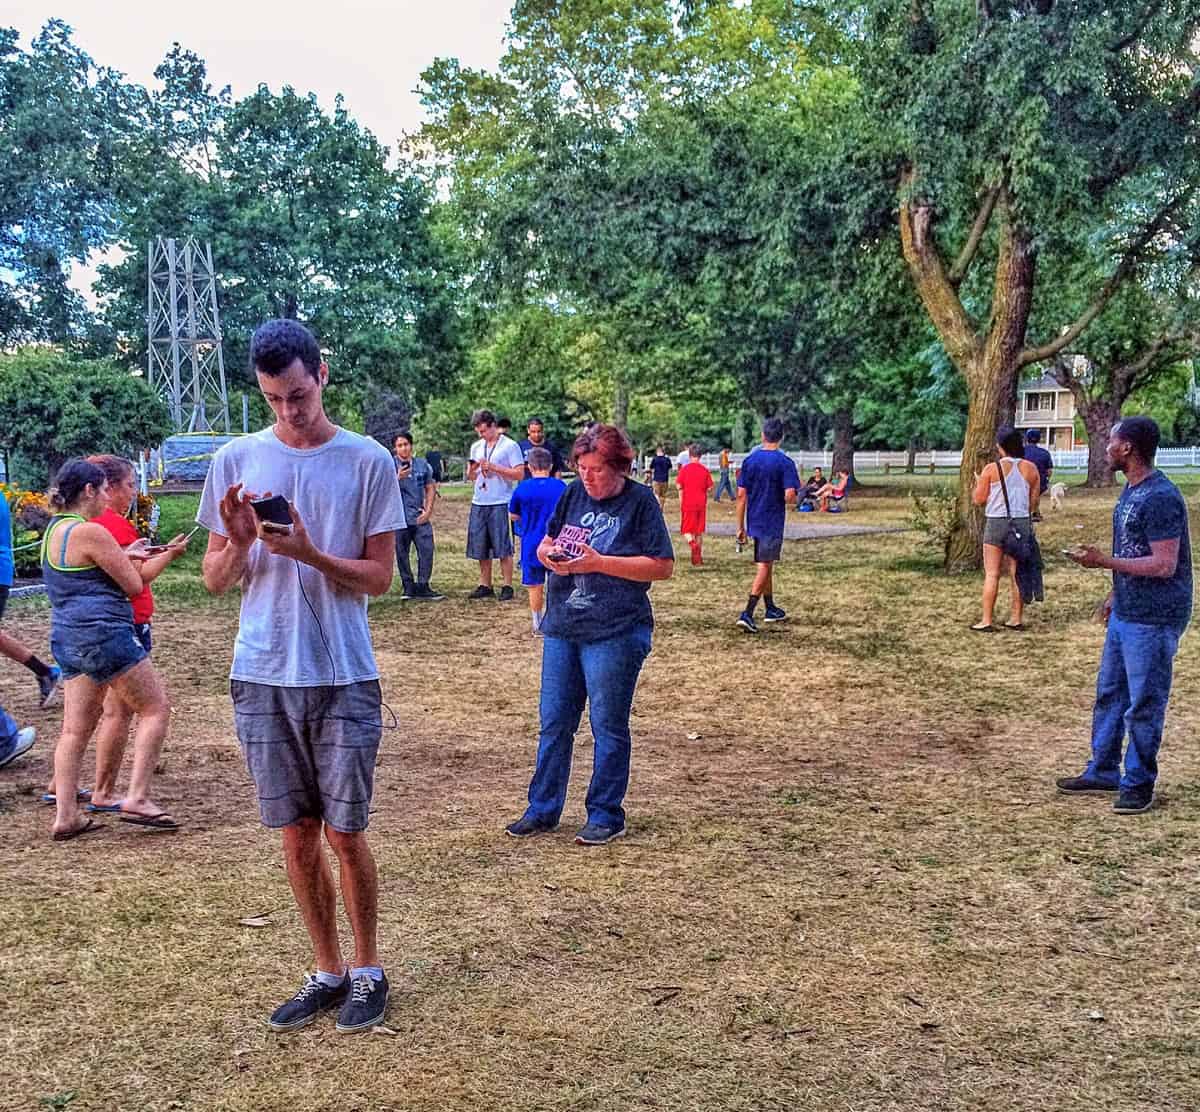 A photo of a people staring at their phones in a park.